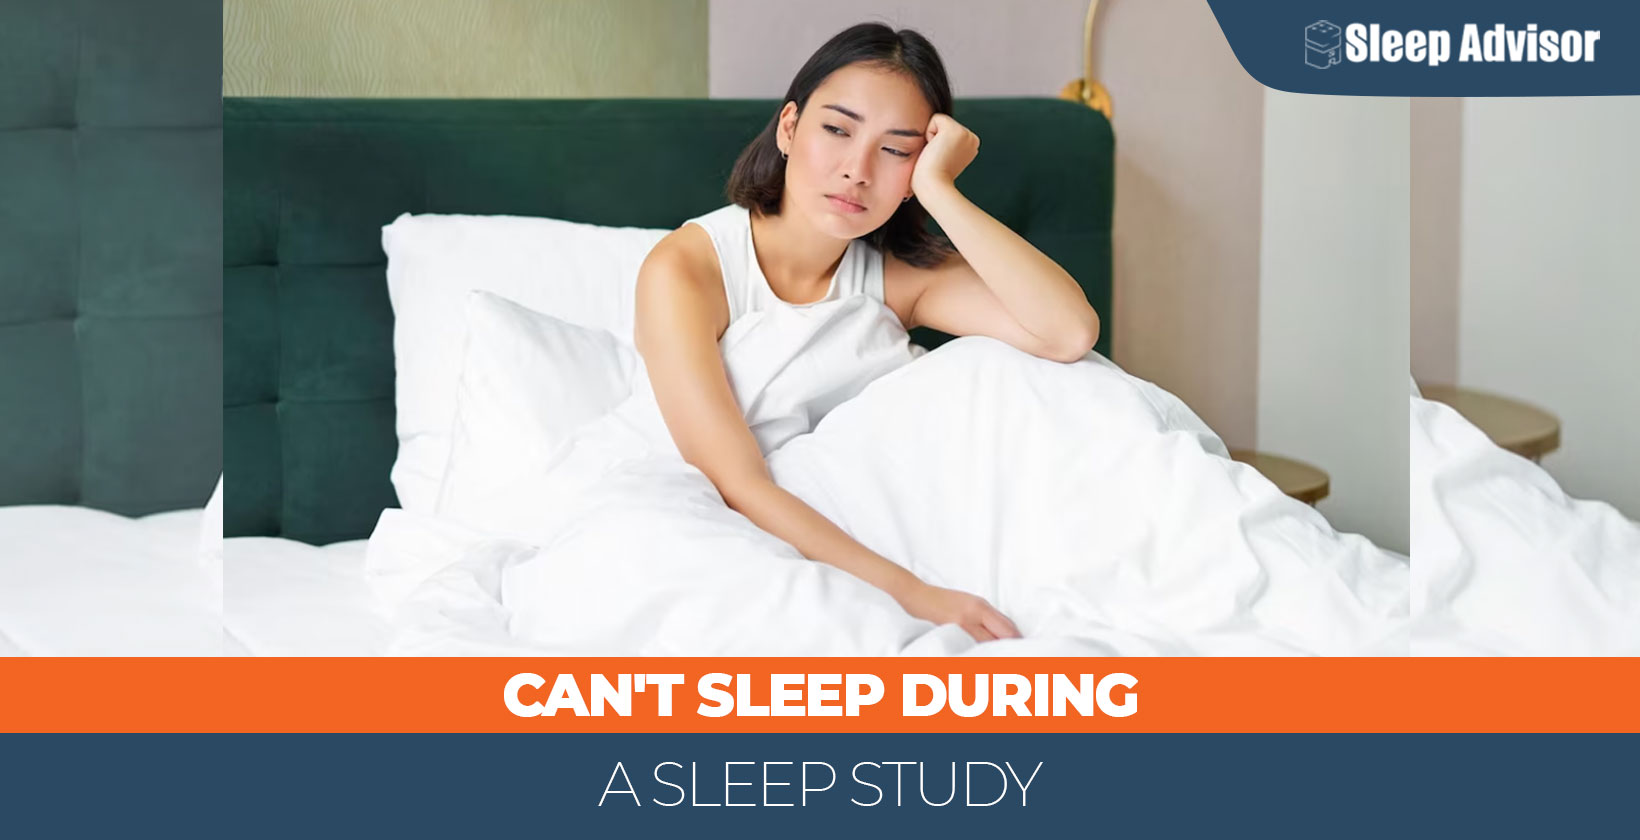 What if I Can’t Sleep During a Sleep Study?